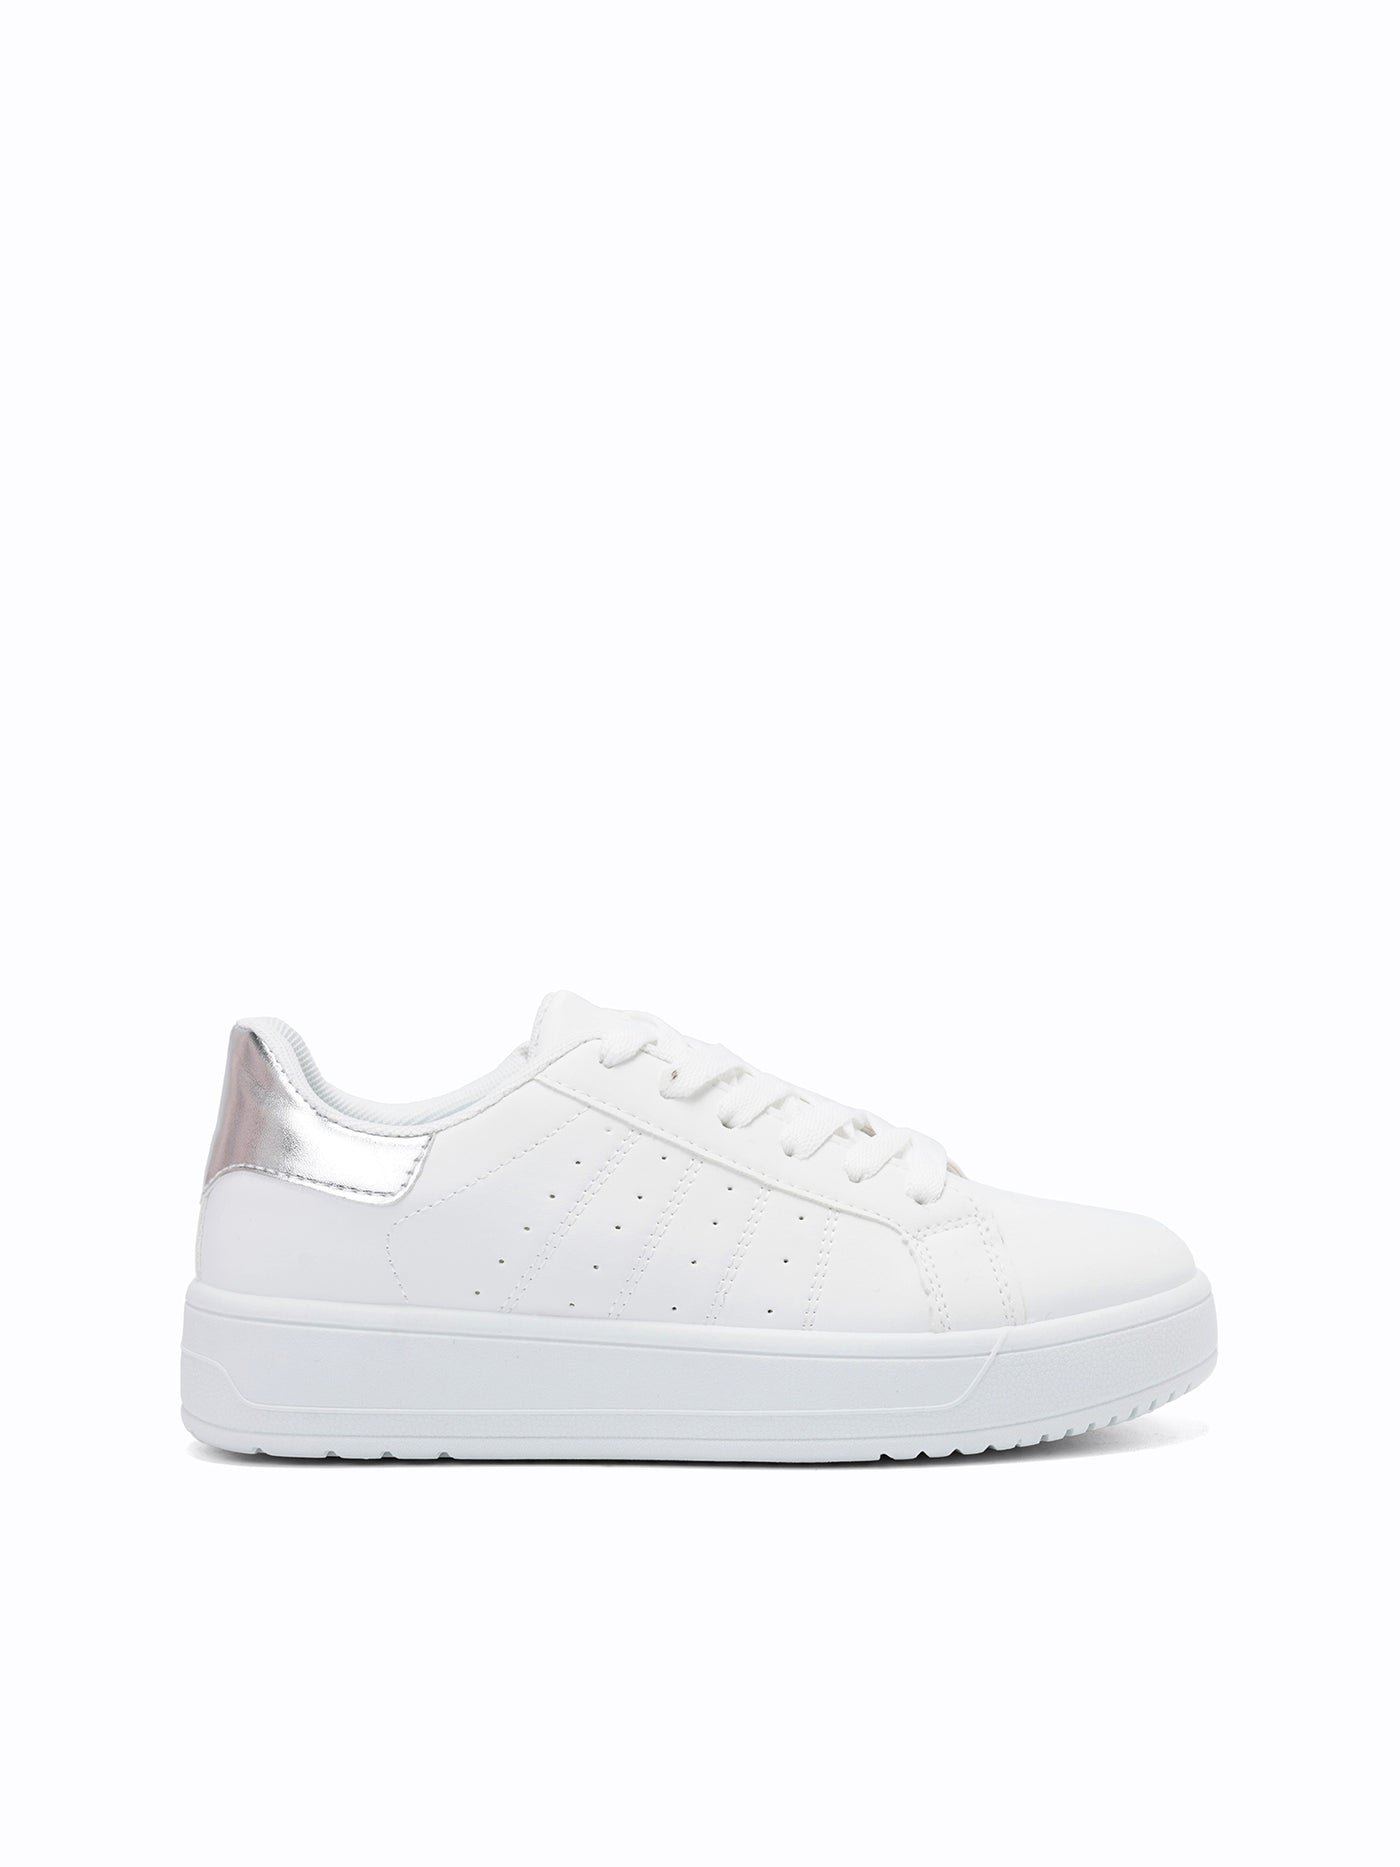 Shubizz Richie Lace Up Sneakers